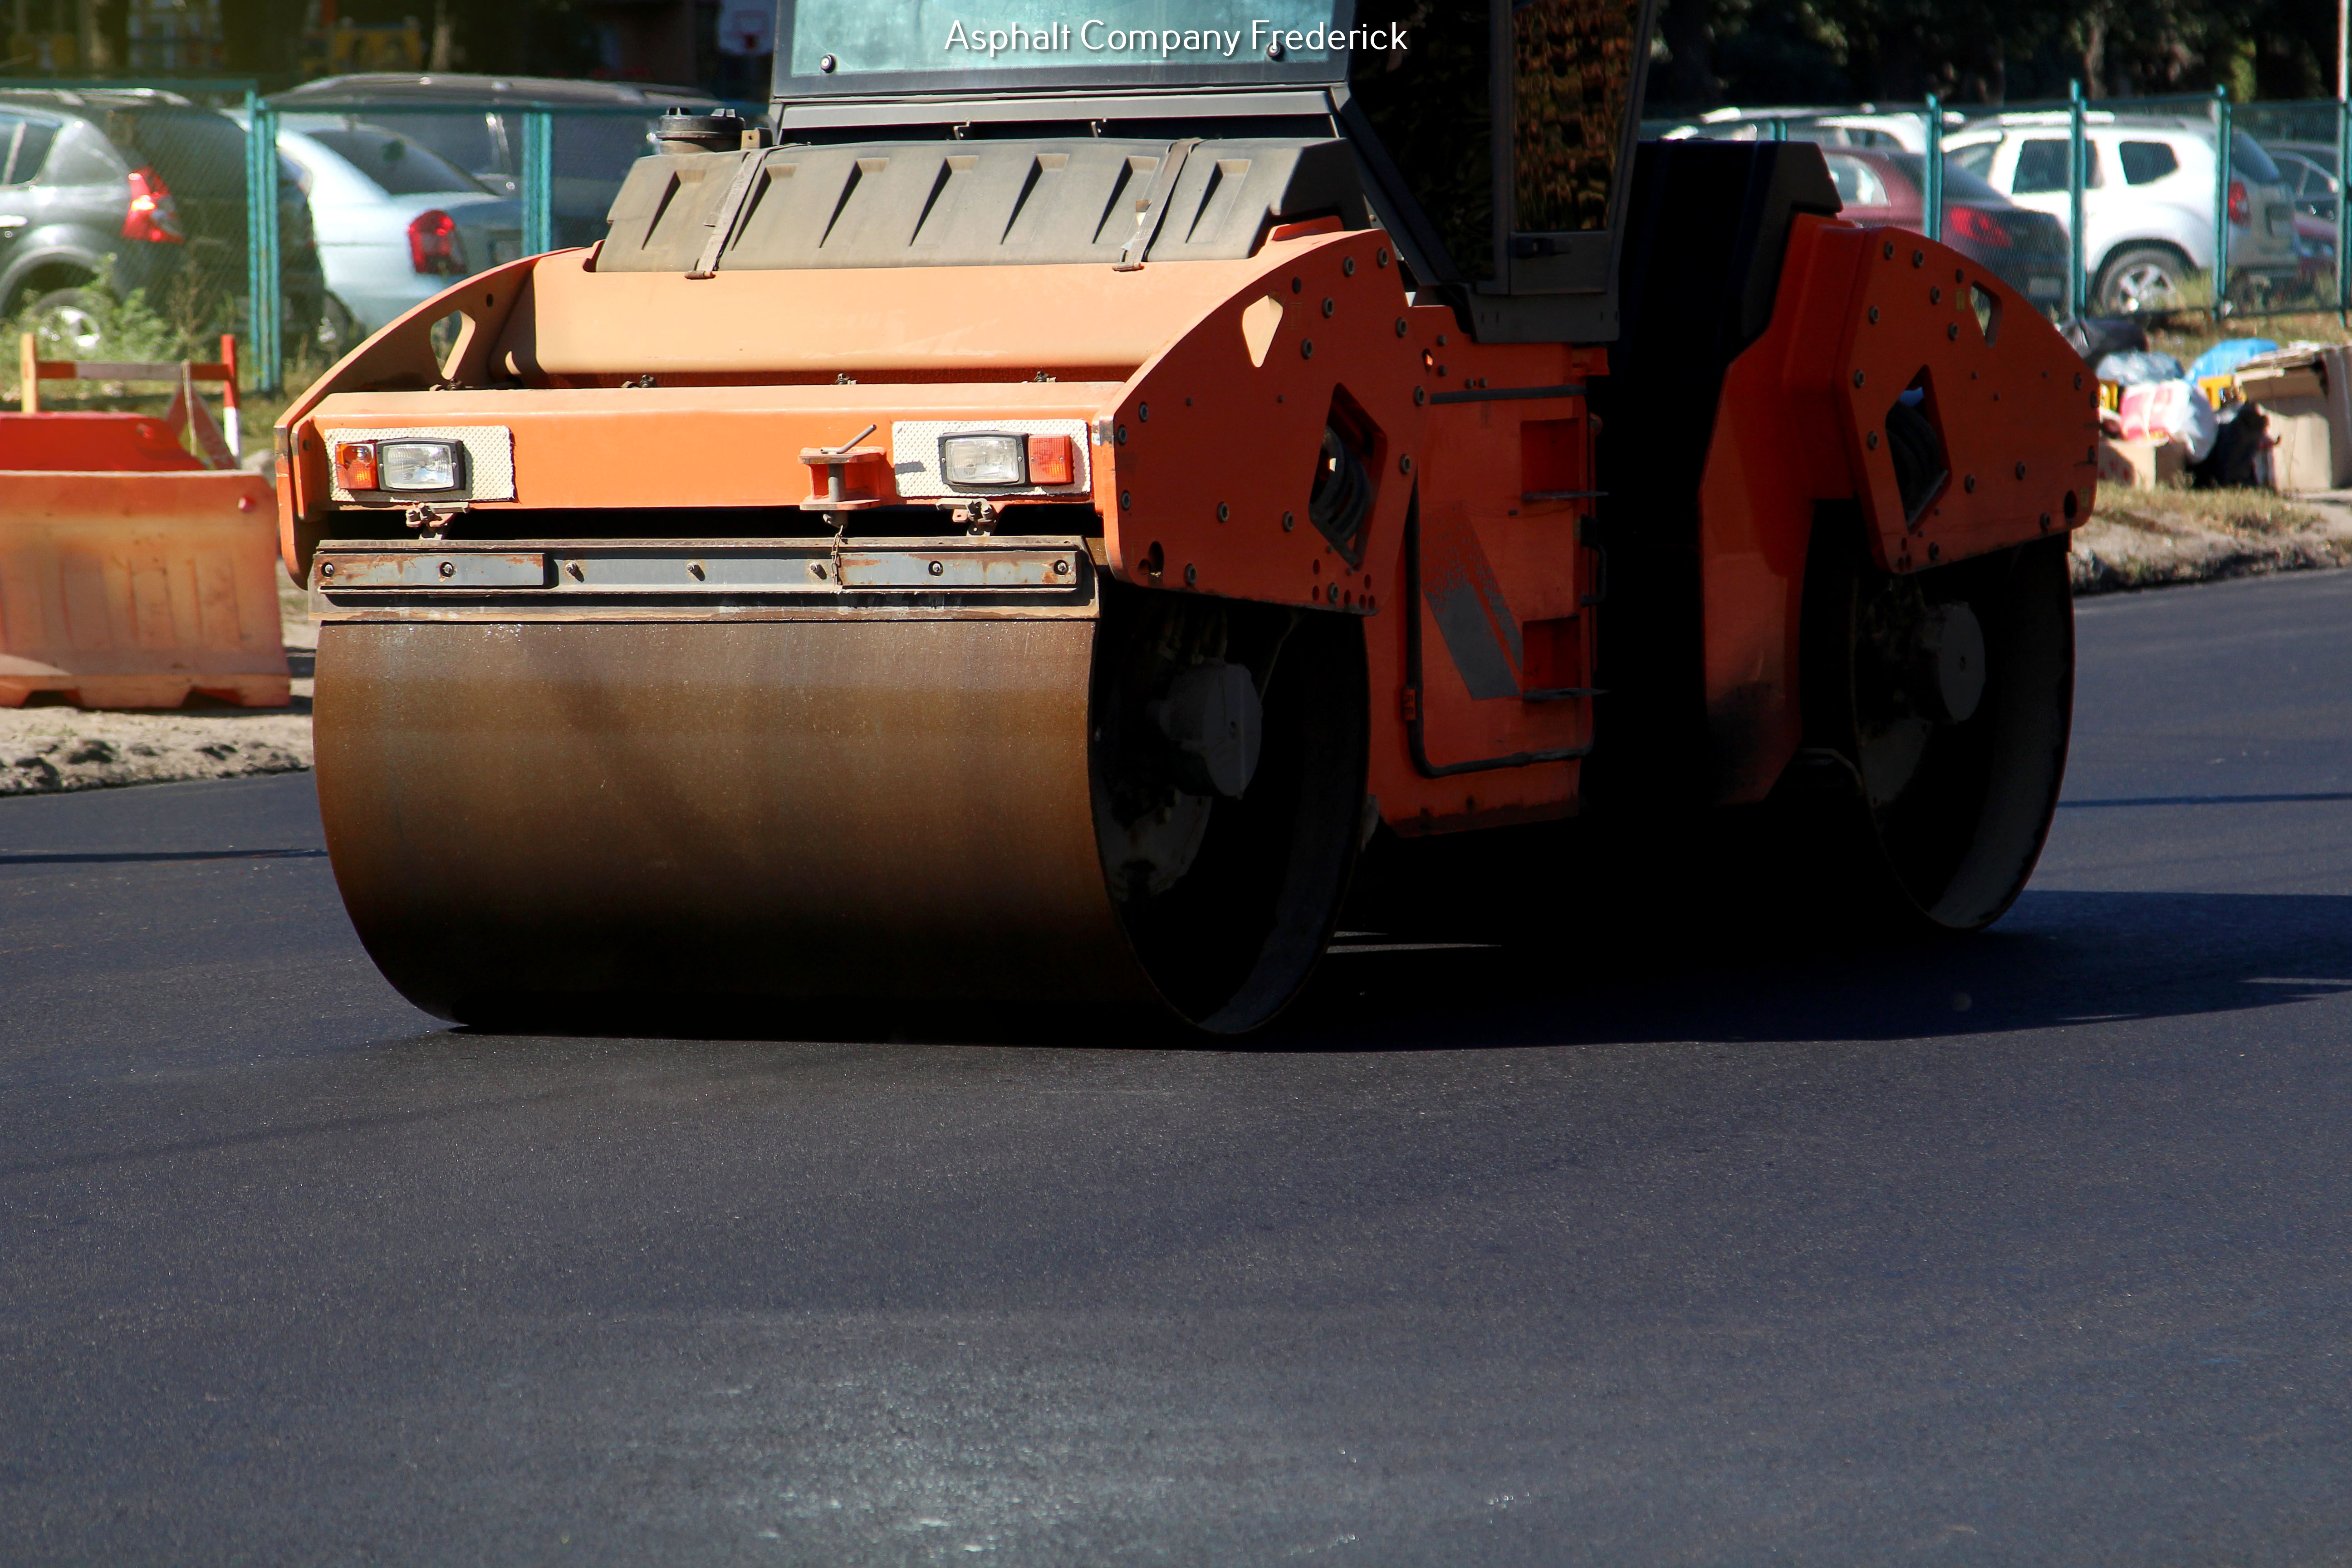 MD Asphalt Paving INC of Frederick Announces the Benefits of Hiring Certified Paving Contractor